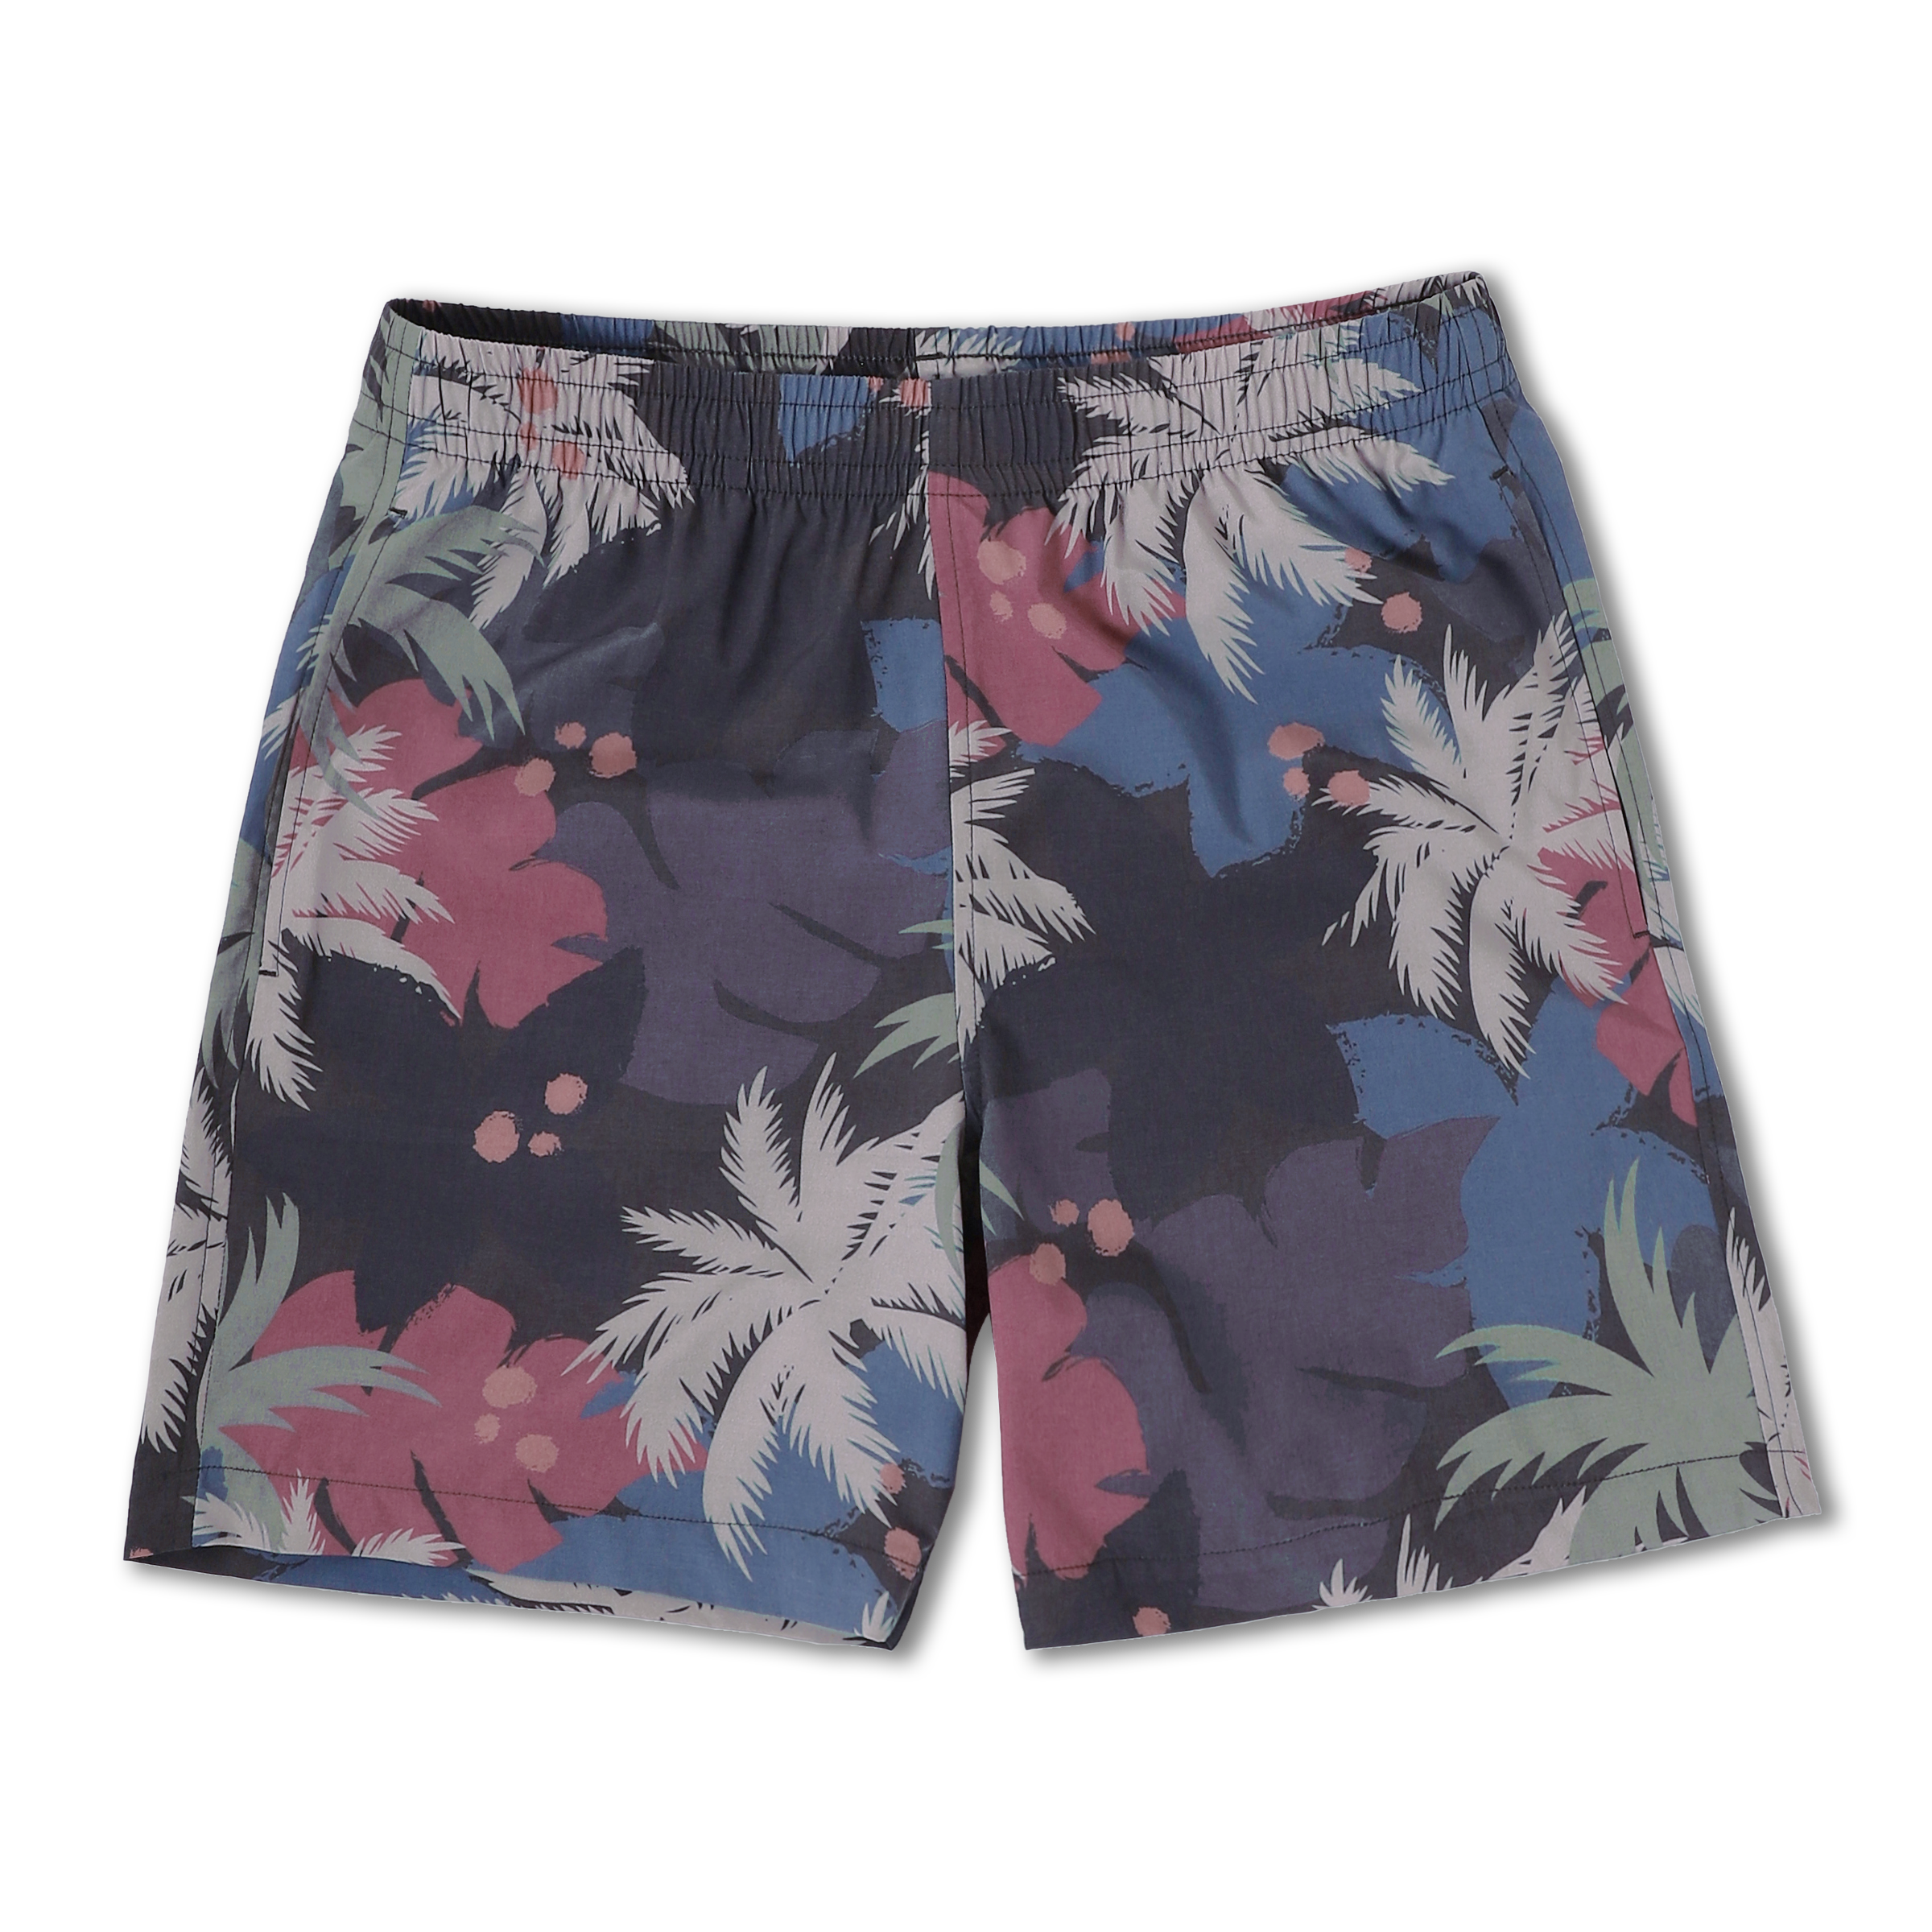 Cabana Short 5.5" Coco front a dark grey print with grey, blue, pink, and off white solid colored palm fronds and tropical leaves on a short with an elastic waistband and two side seam pockets